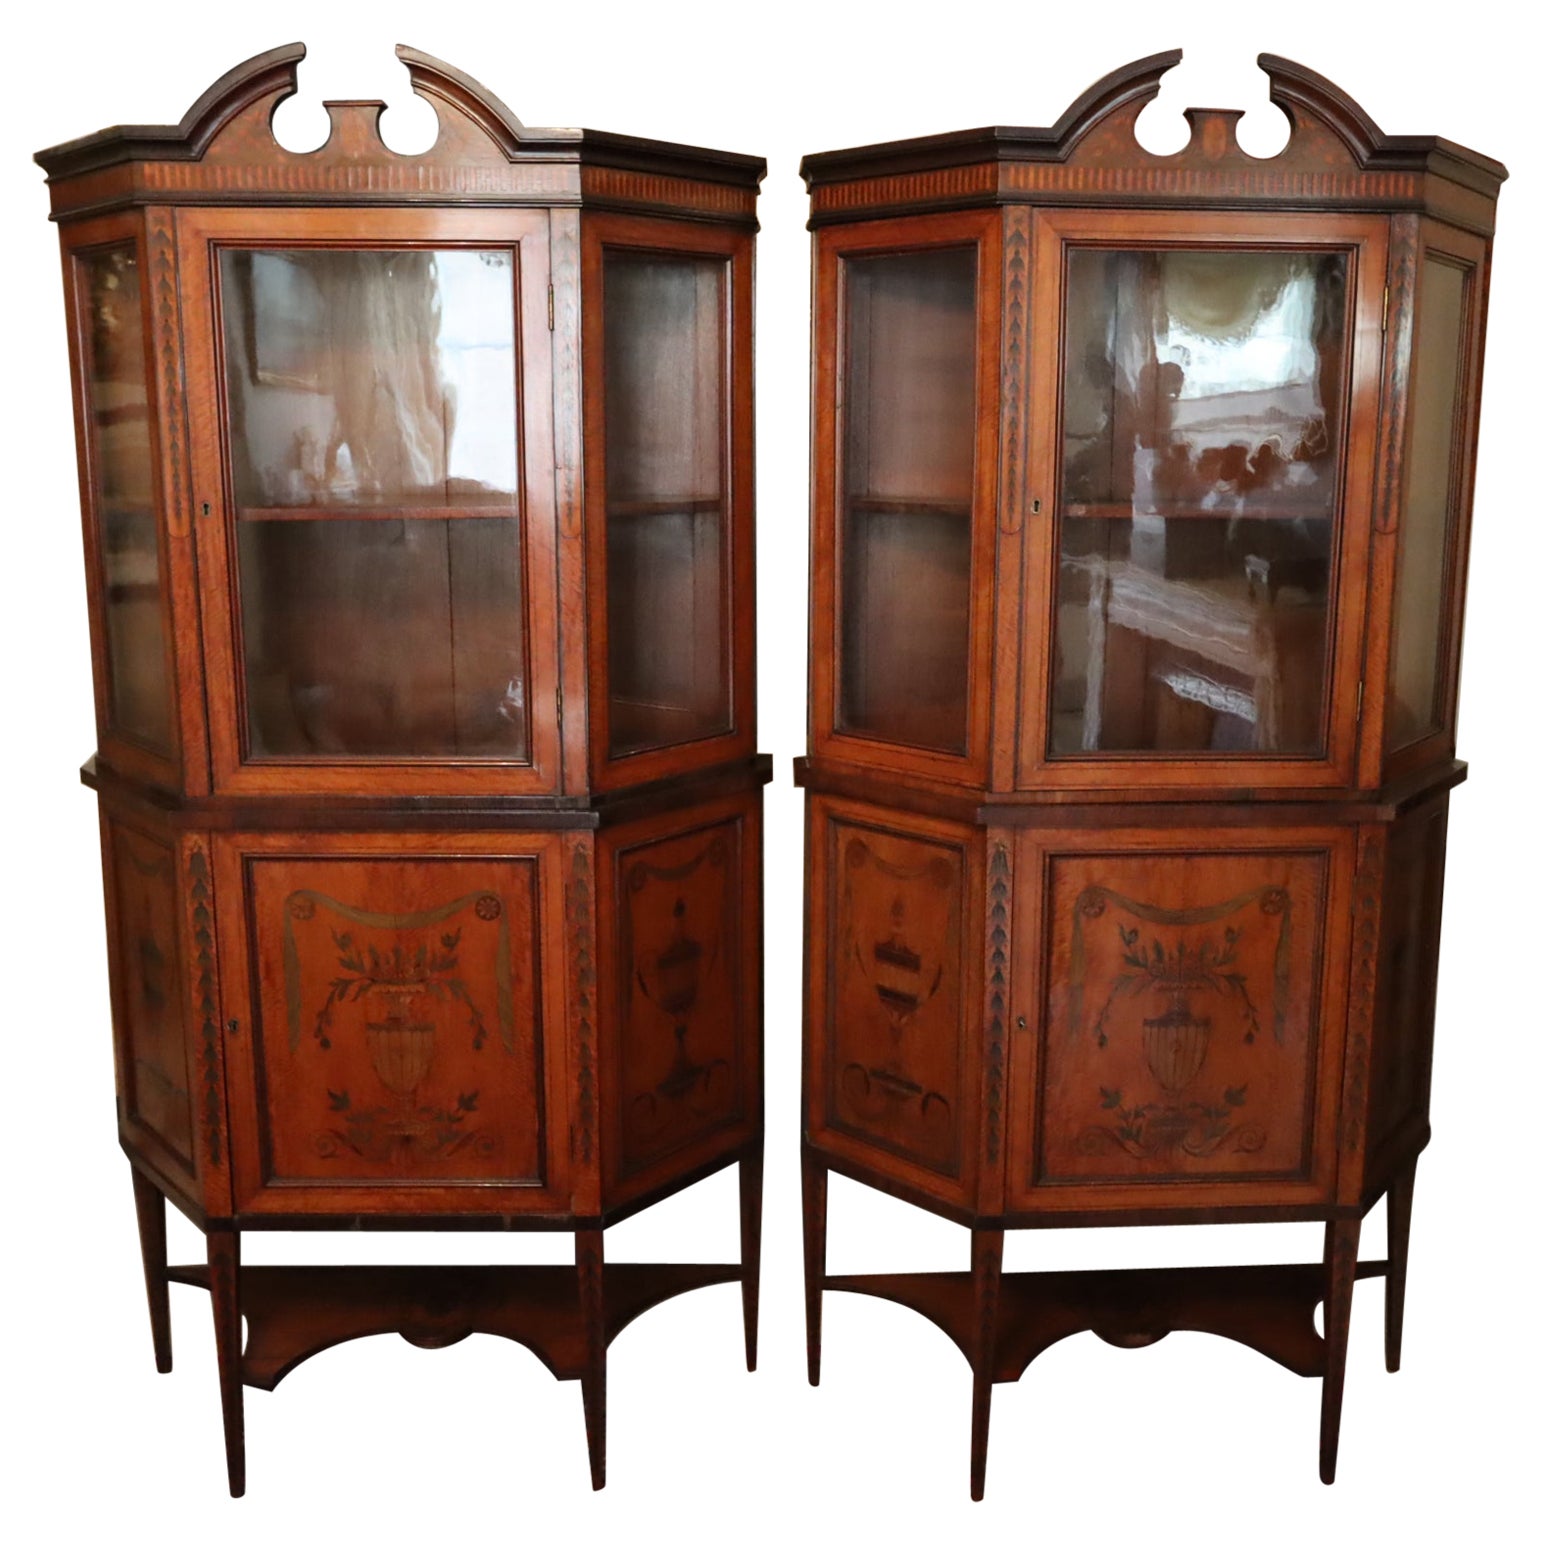 A Beautiful pair of Satinwood inlaid Cabinets, Circa. 1910